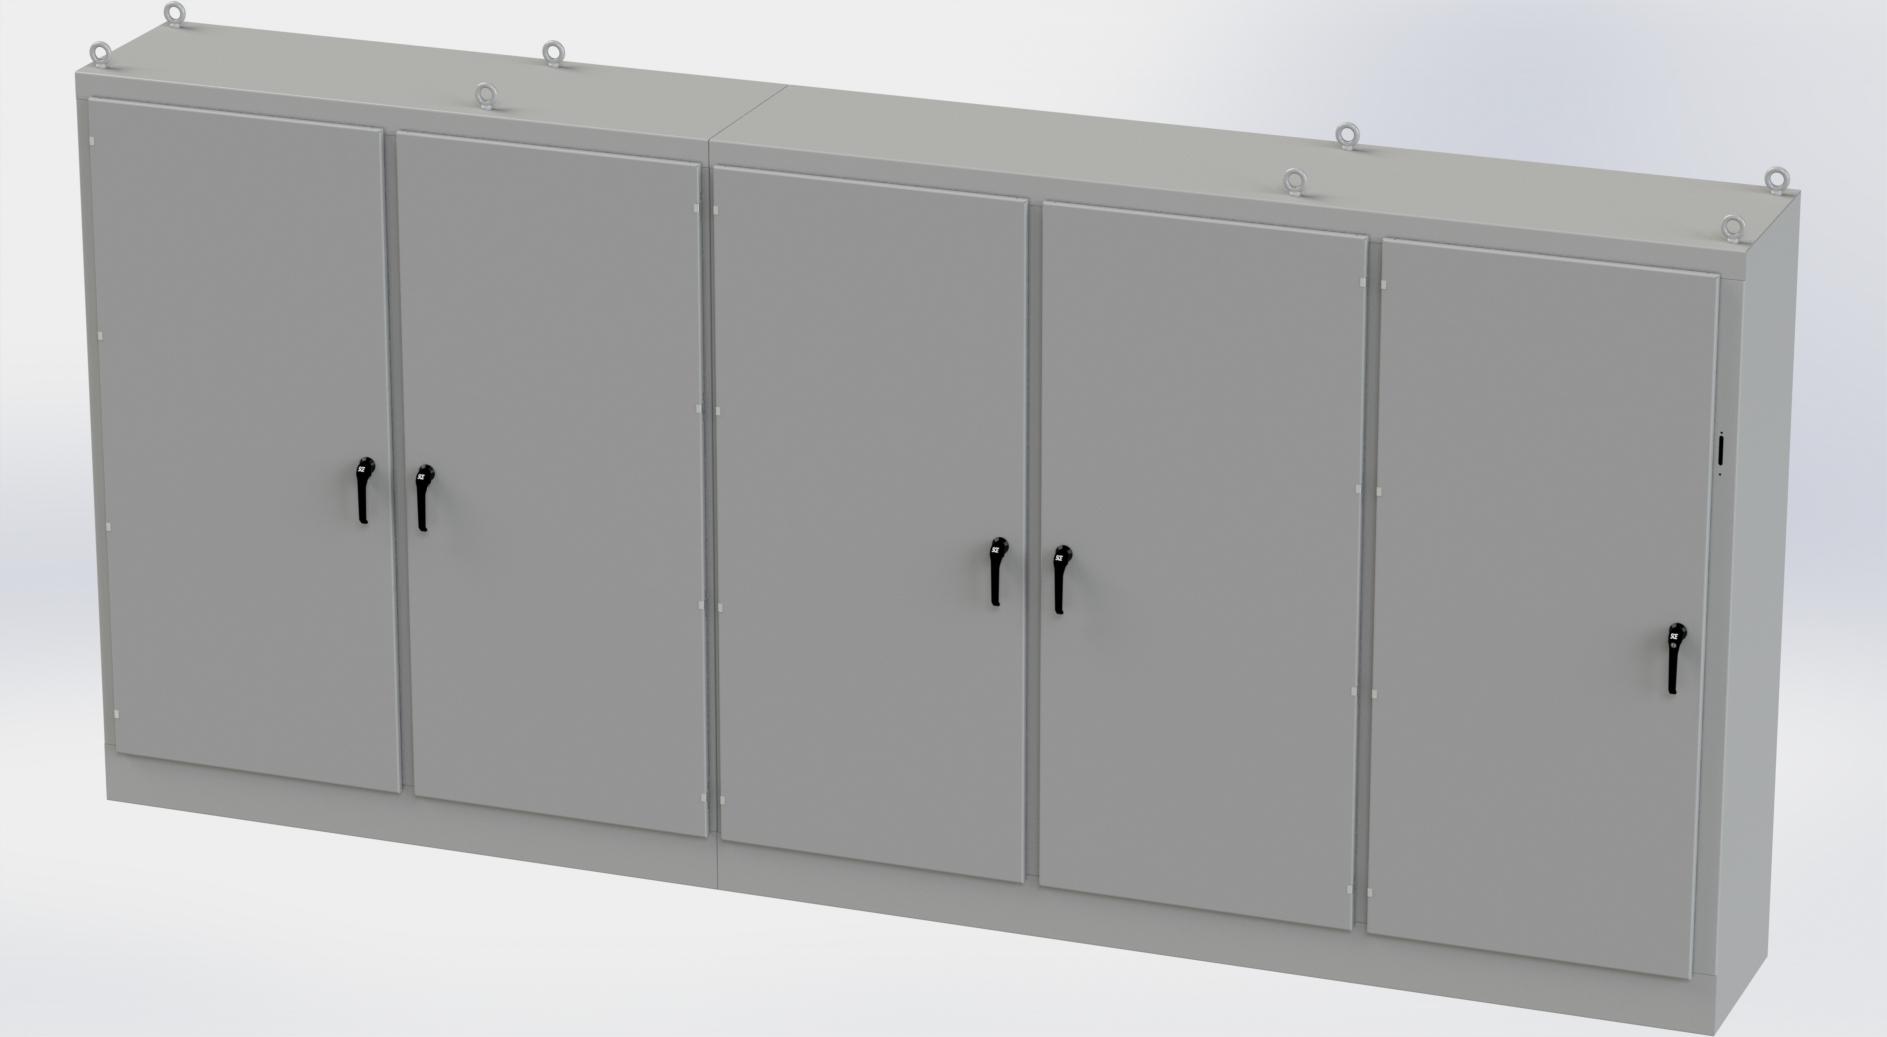 Saginaw Control SCE-90XM5EW24 5DR XM Enclosure, Height:90.00", Width:196.75", Depth:24.00", ANSI-61 gray powder coating inside and out. Sub-panels are powder coated white.